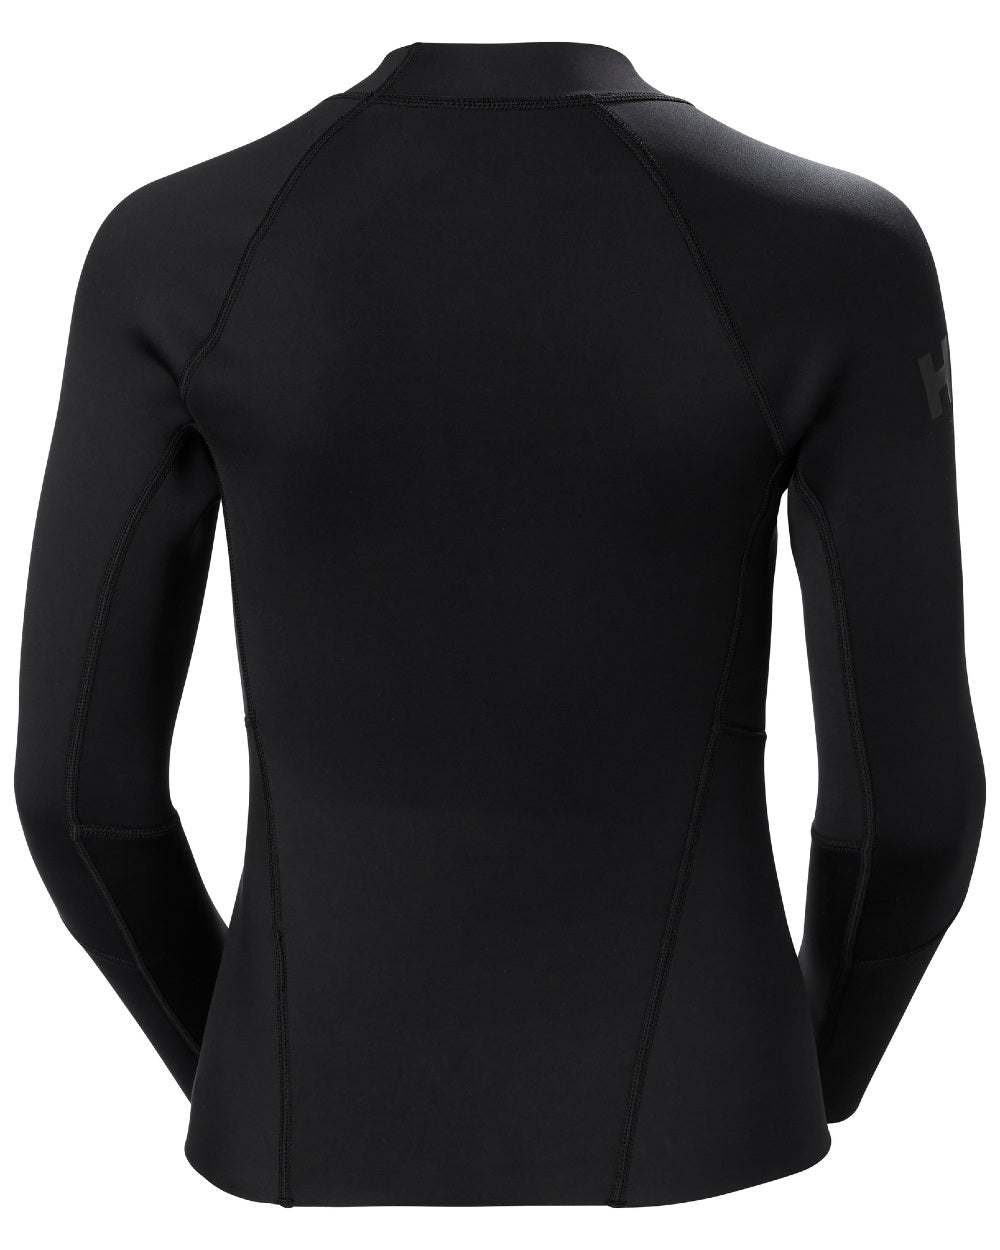 Black coloured Helly Hansen womens waterwear sailing top on a white background 